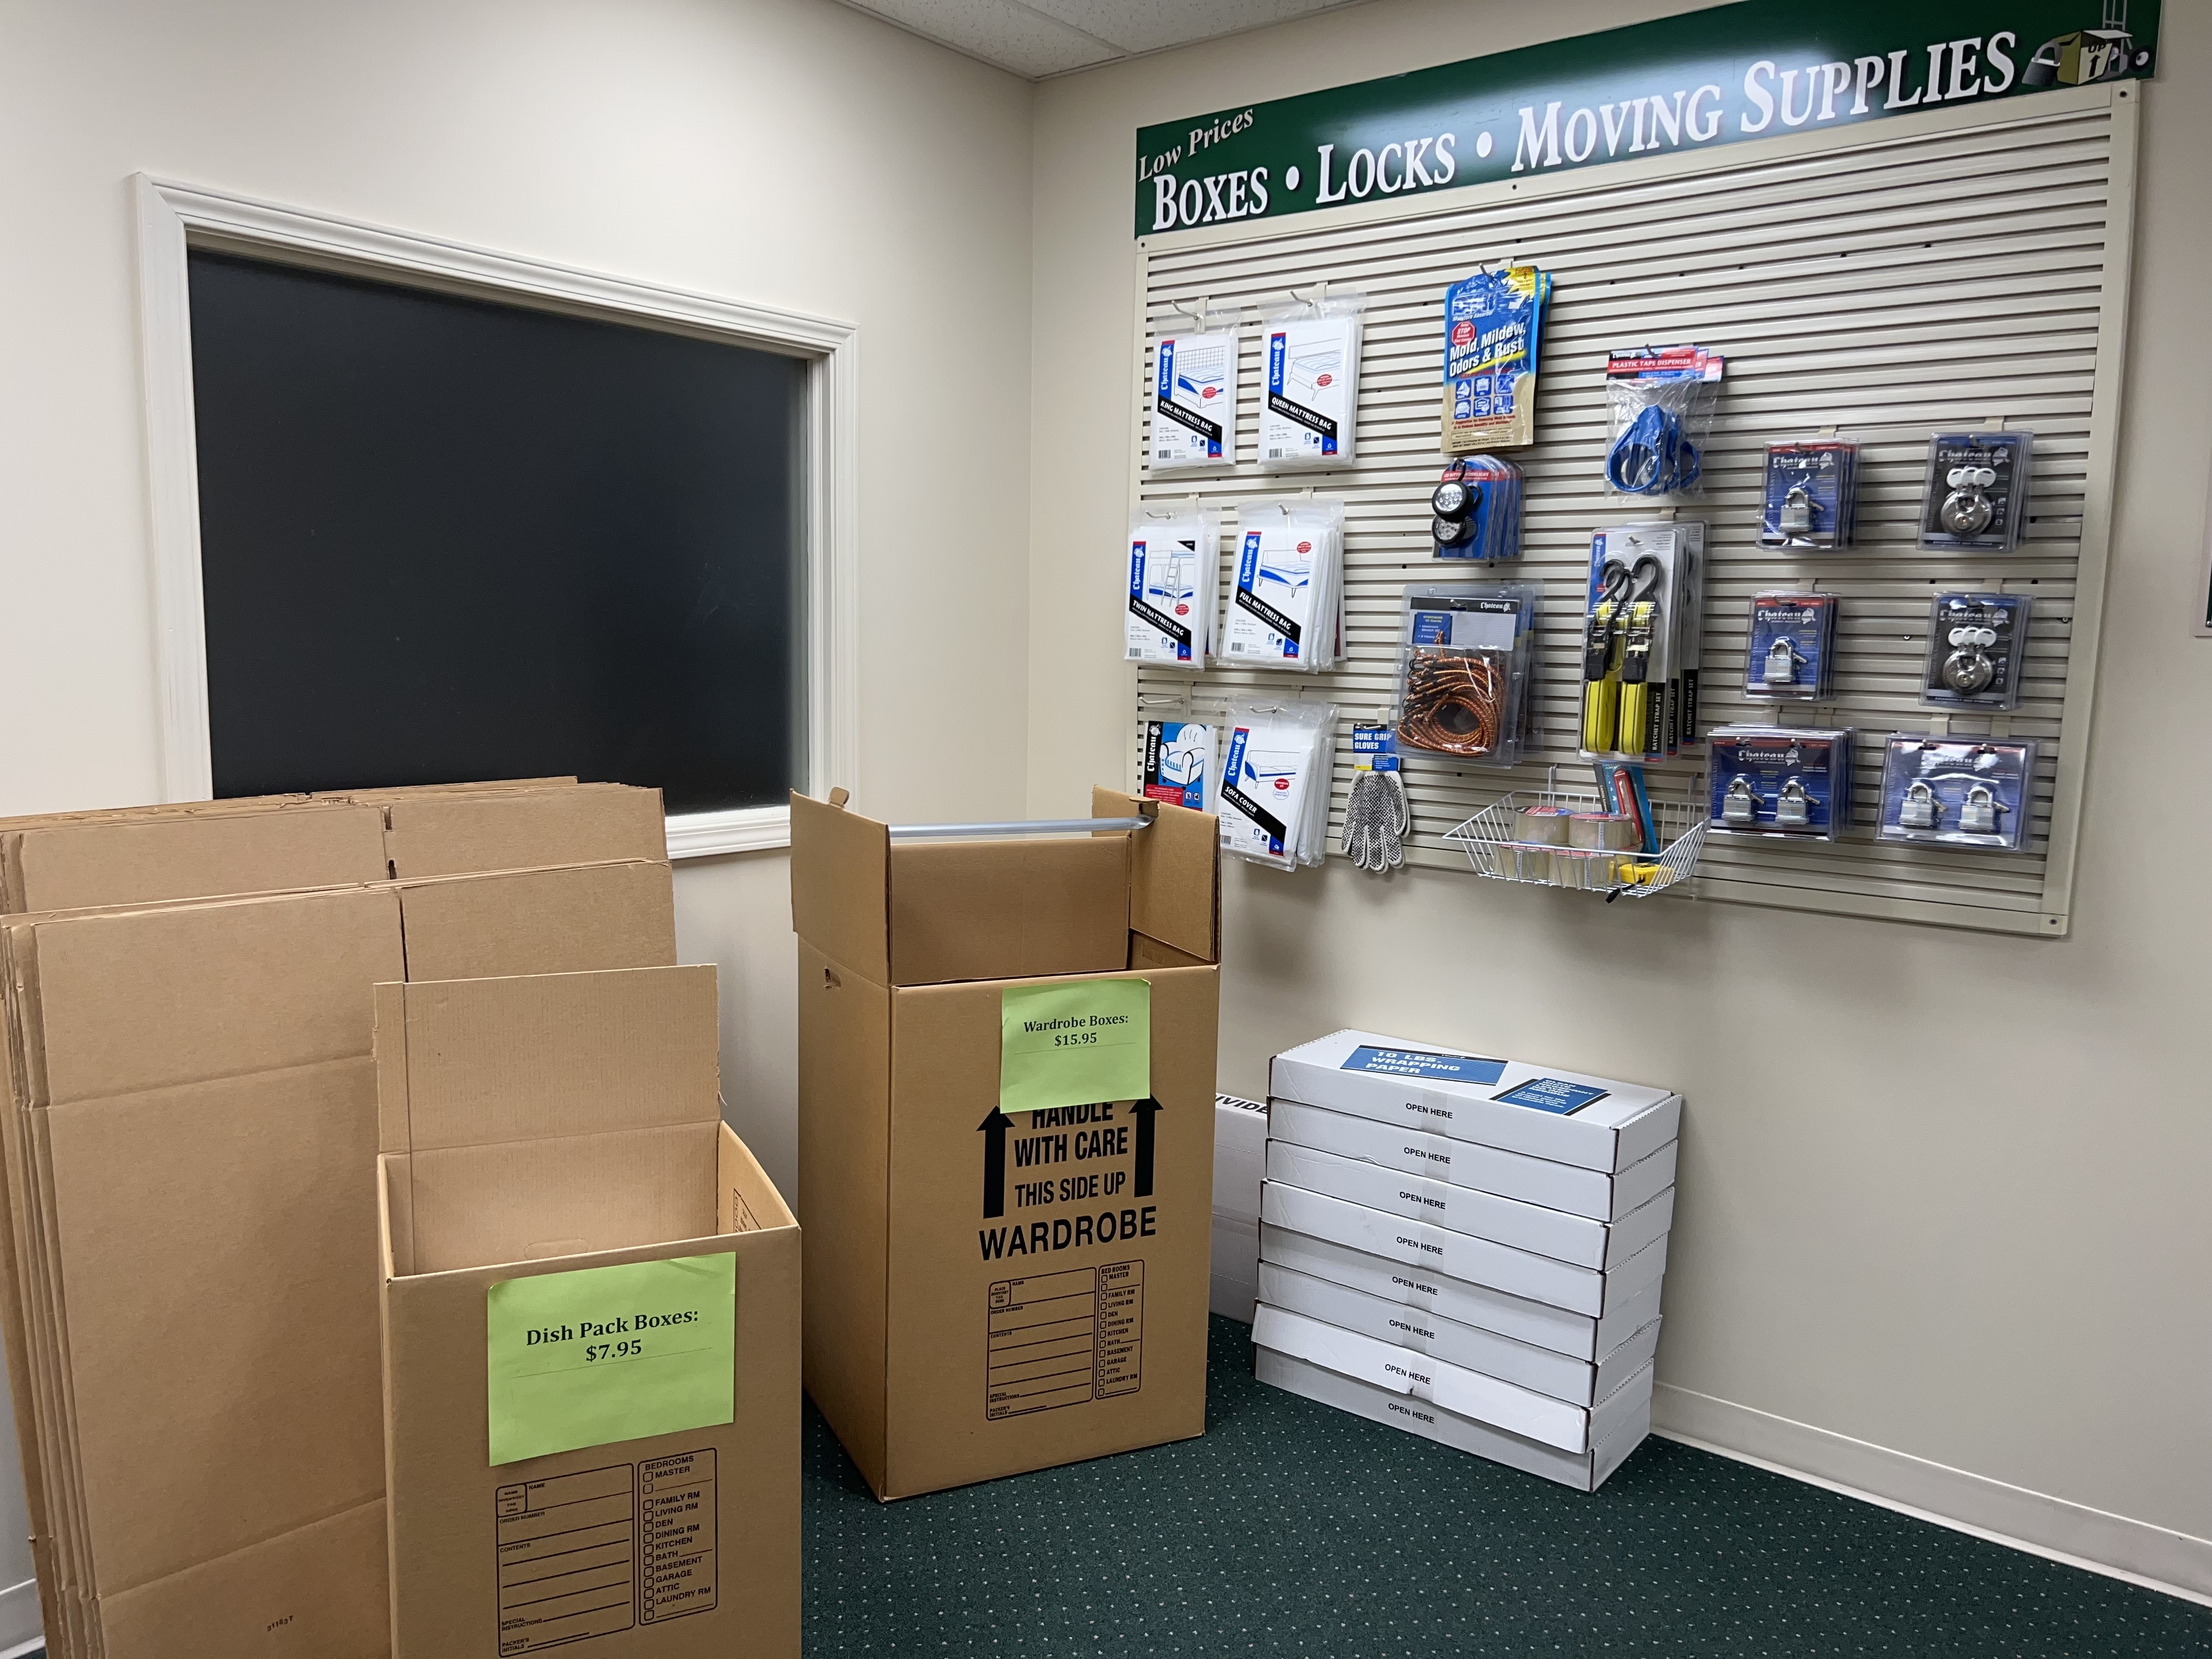 Boxes and Supplies in Gainesville, GA